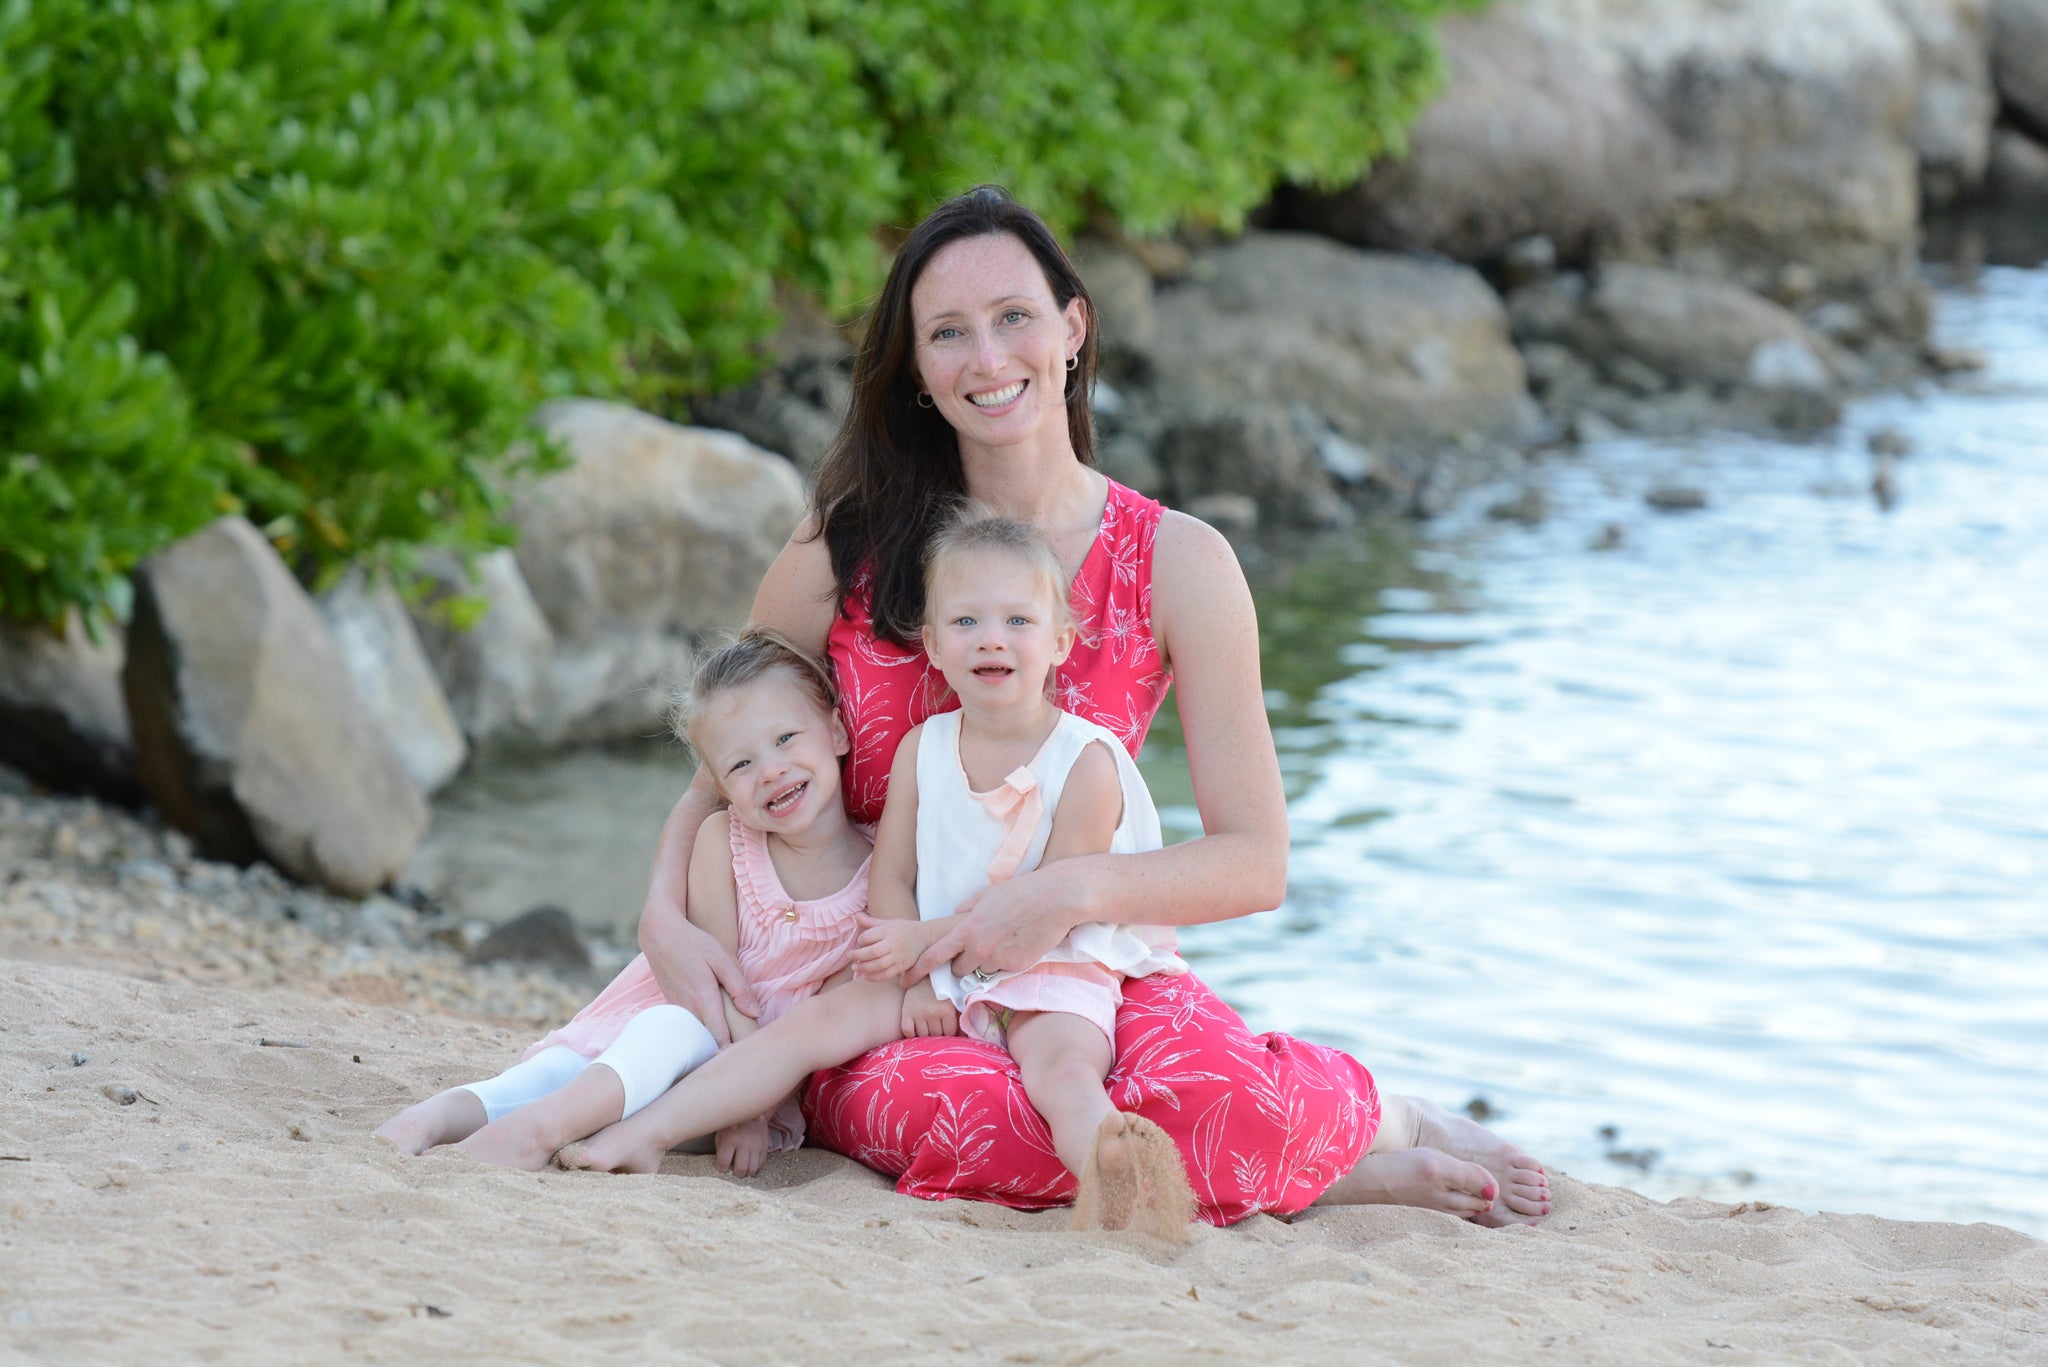 Woman in pink dress with two young girls sitting on a beach.